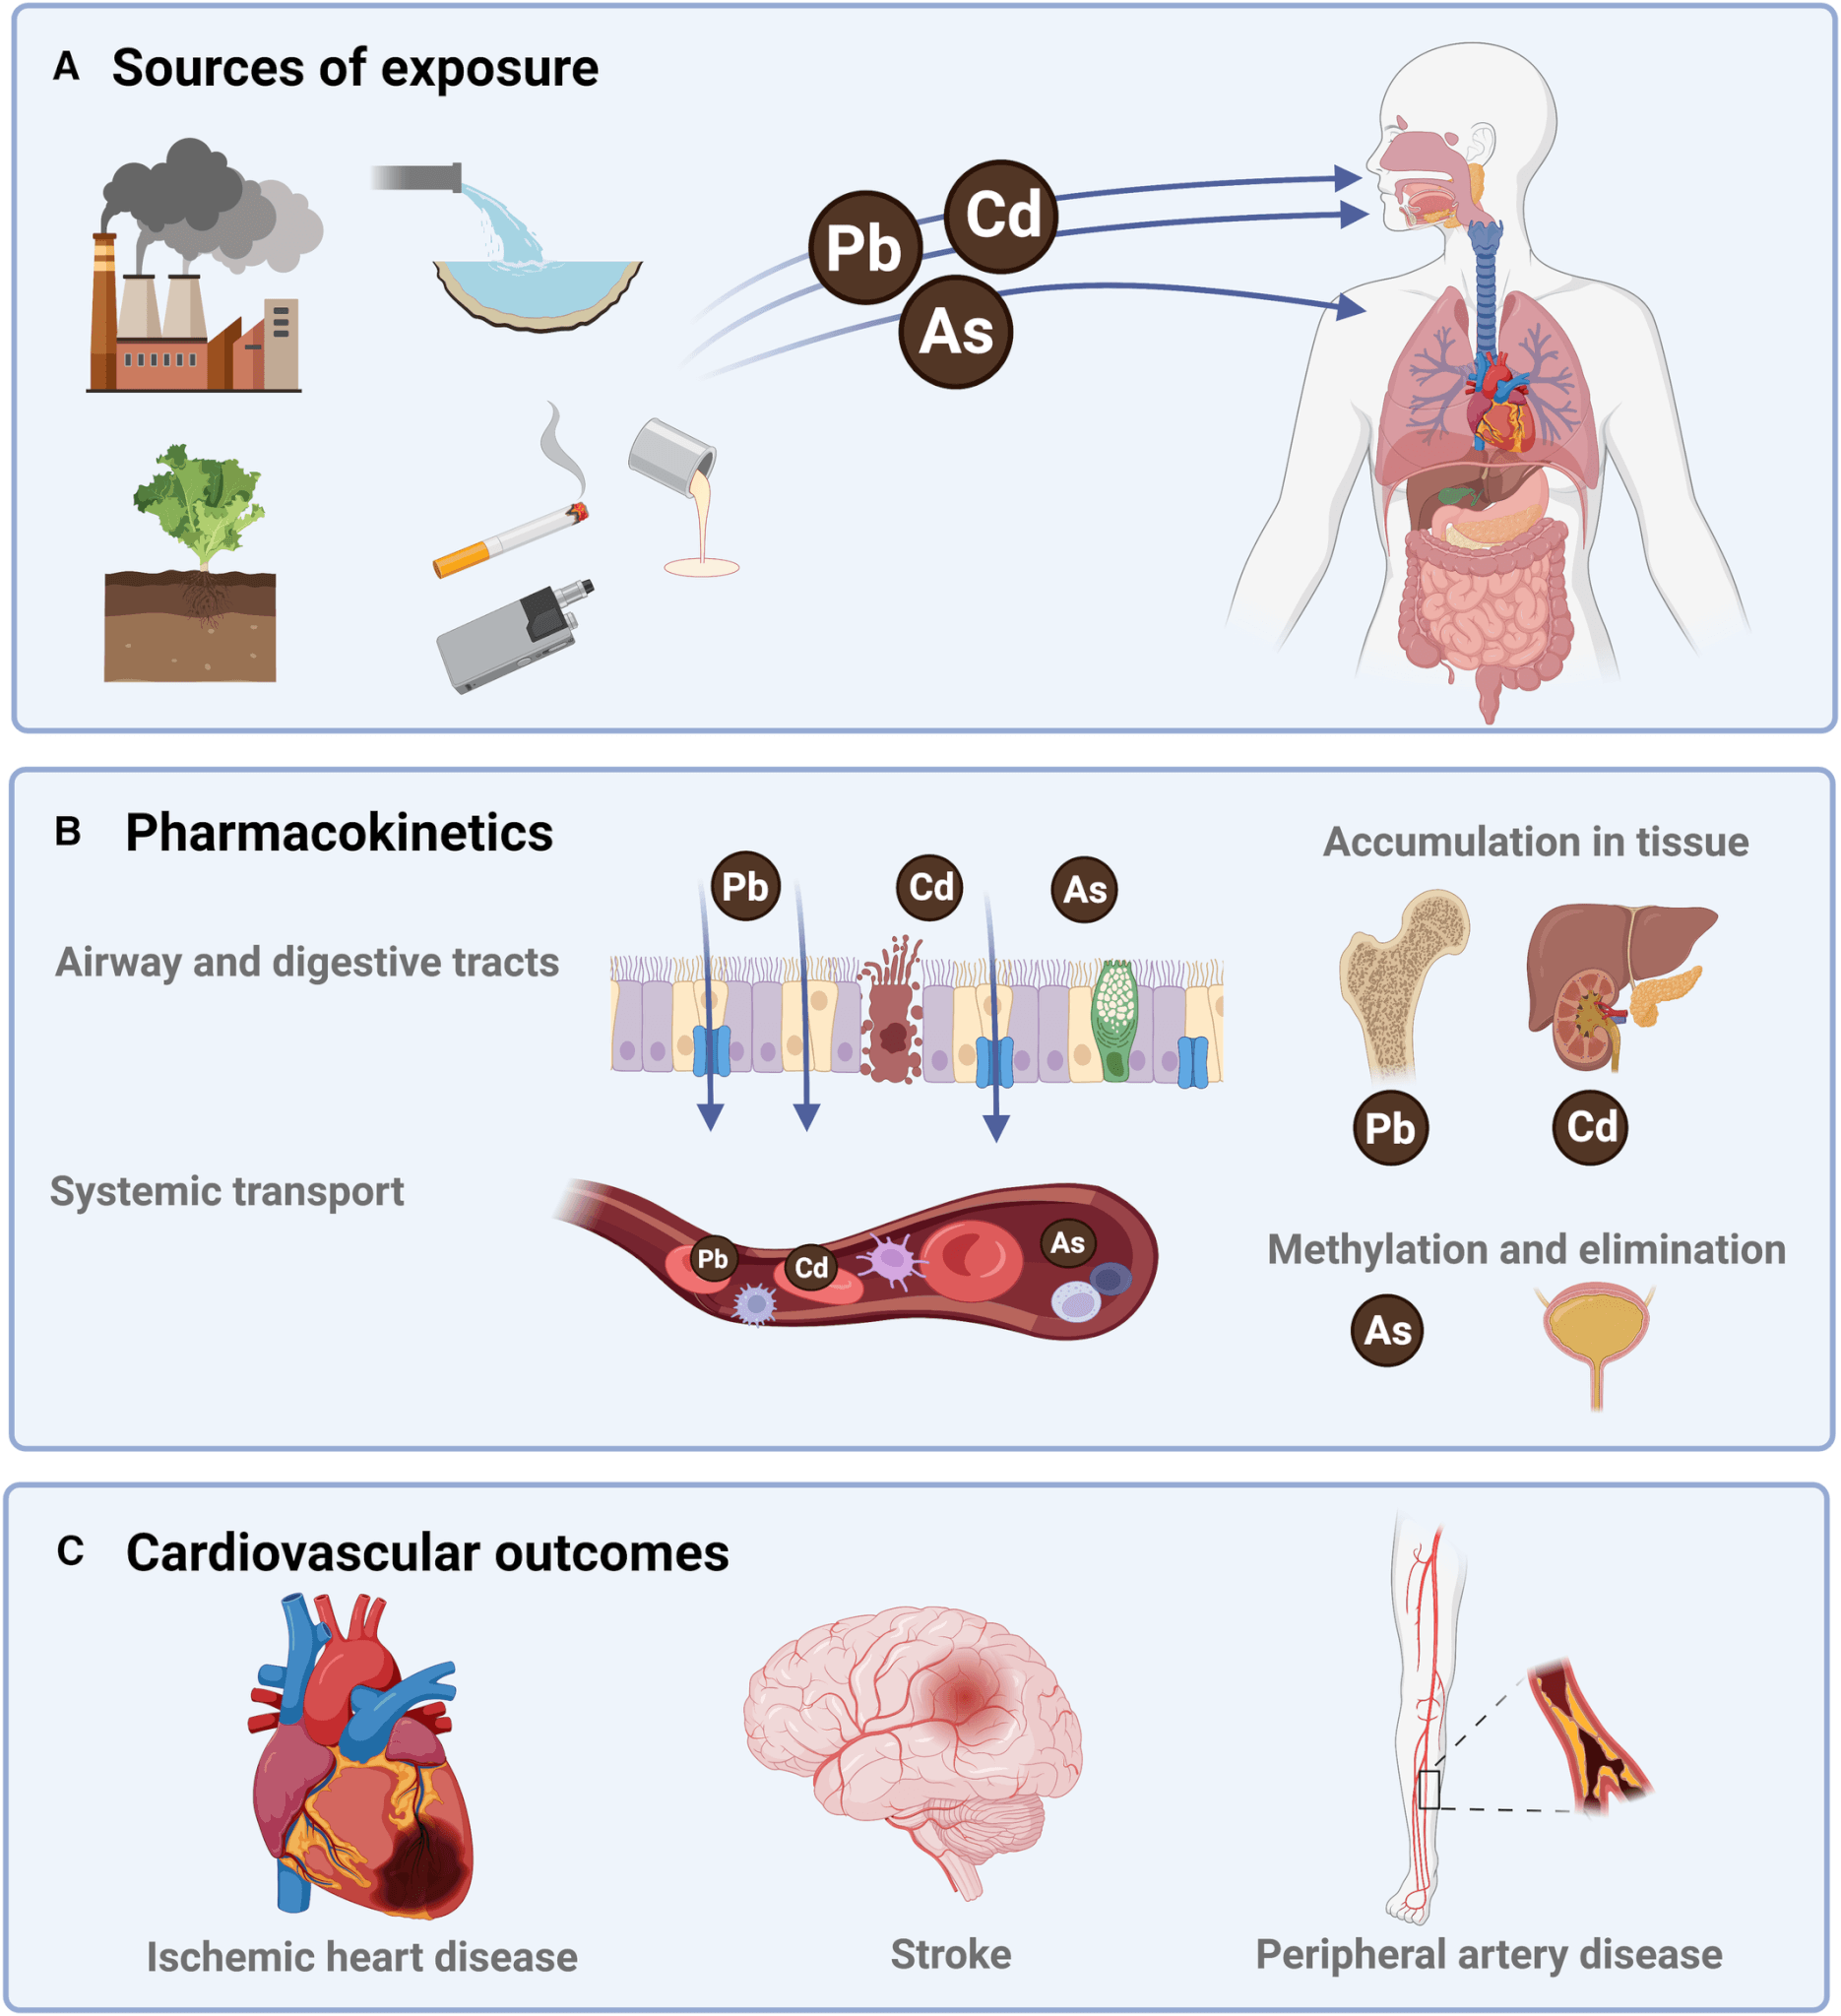 Three rectanlgular graphics.. one sources possible sources of metal pollution with pics of a power plant, soil, cigarettes and water... next to it is drawing of a body with the insides displayed.second graphic shows airways and digestive tracts. third photo shows the heart, the brain impacted by stroke and artery disease..indicated by a drawing red lines running down left of arm of sketch